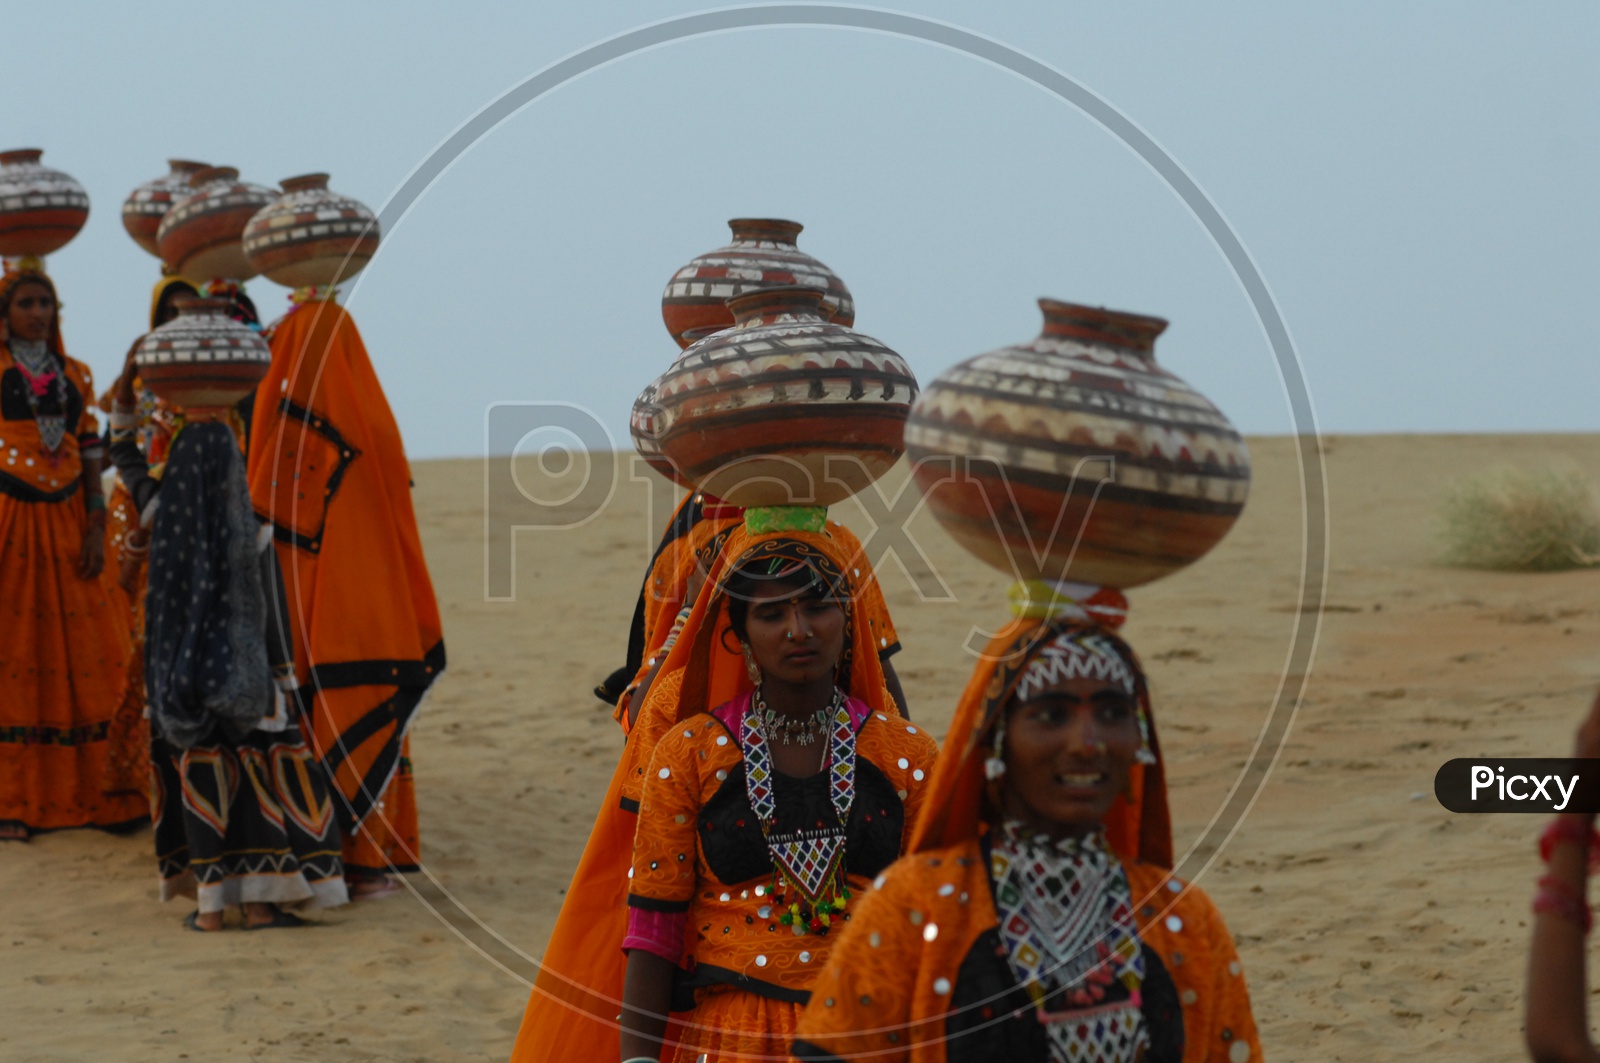 Rajasthani women carrying pots on their heads